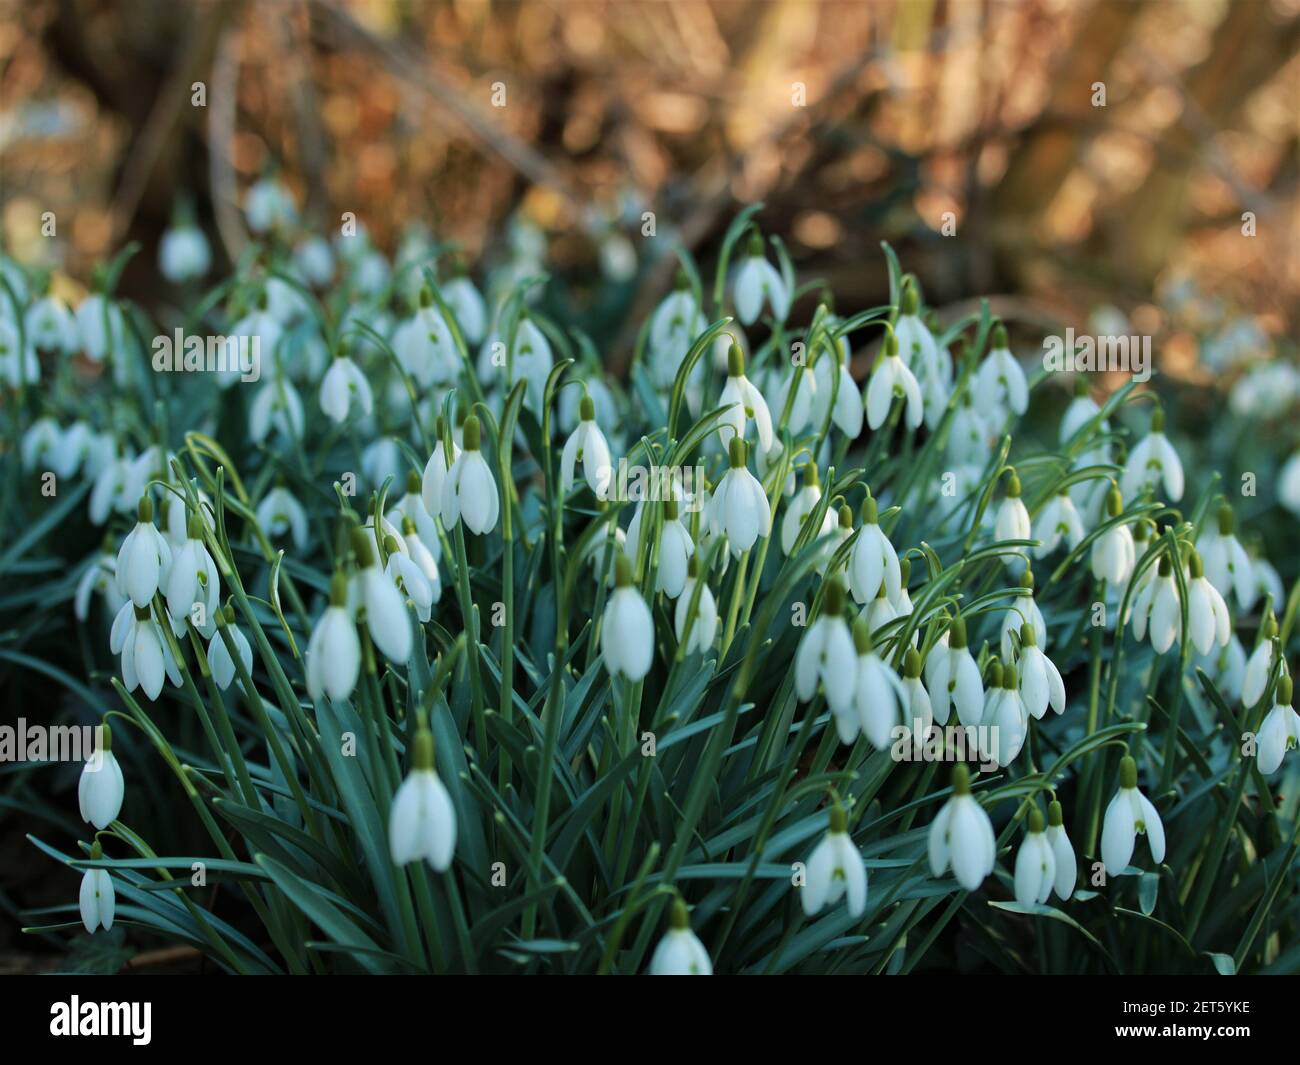 Snowdrops - Galanthus in the bed as a close up Stock Photo